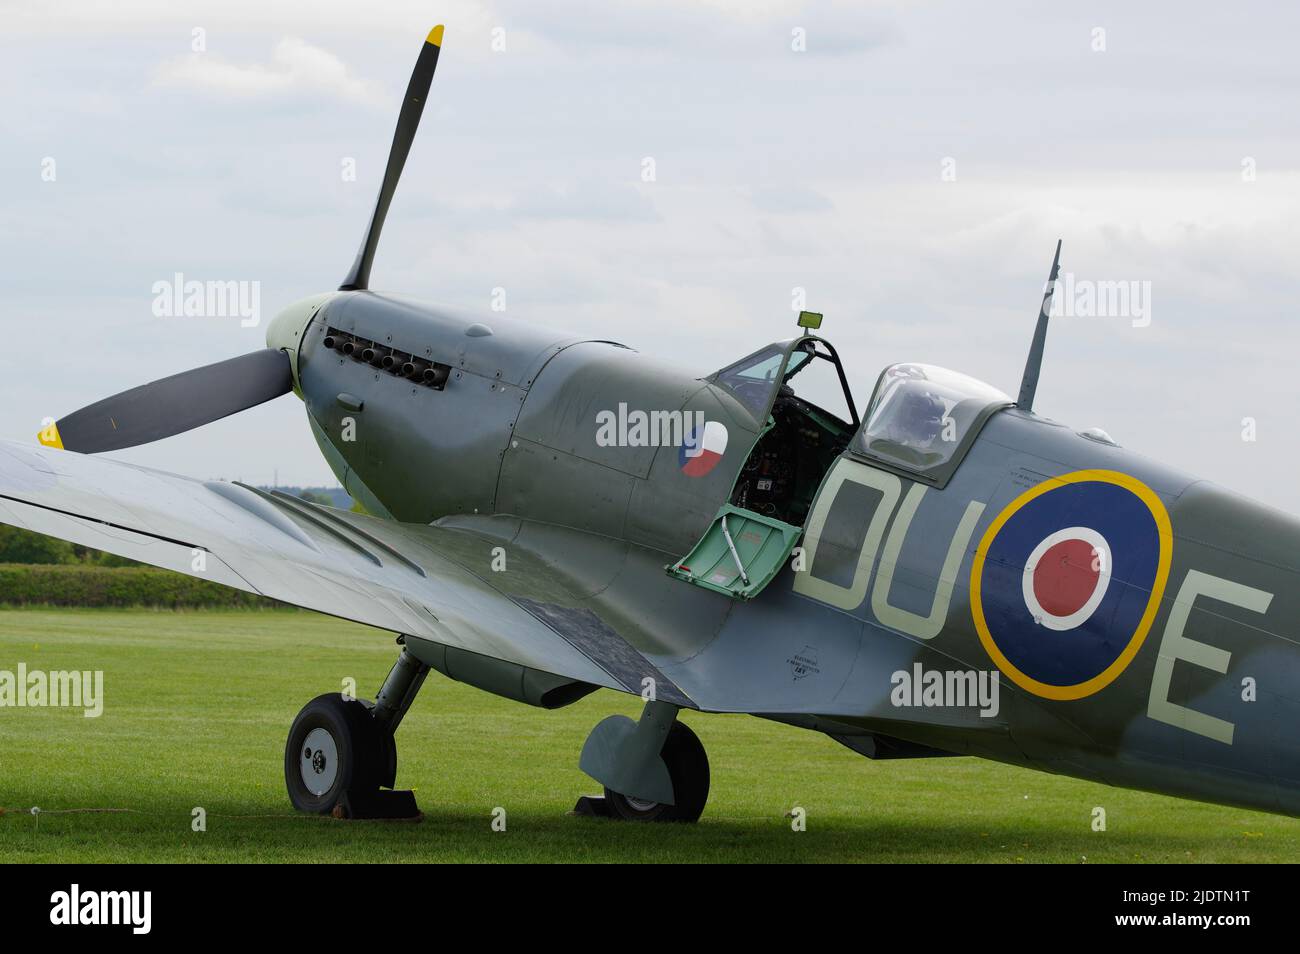 Vickers Supermarine Spitfire LFVC, AR501, G-AWII, Shuttleworth Collection, Old Warden, Bedfordshire, England, Stock Photo